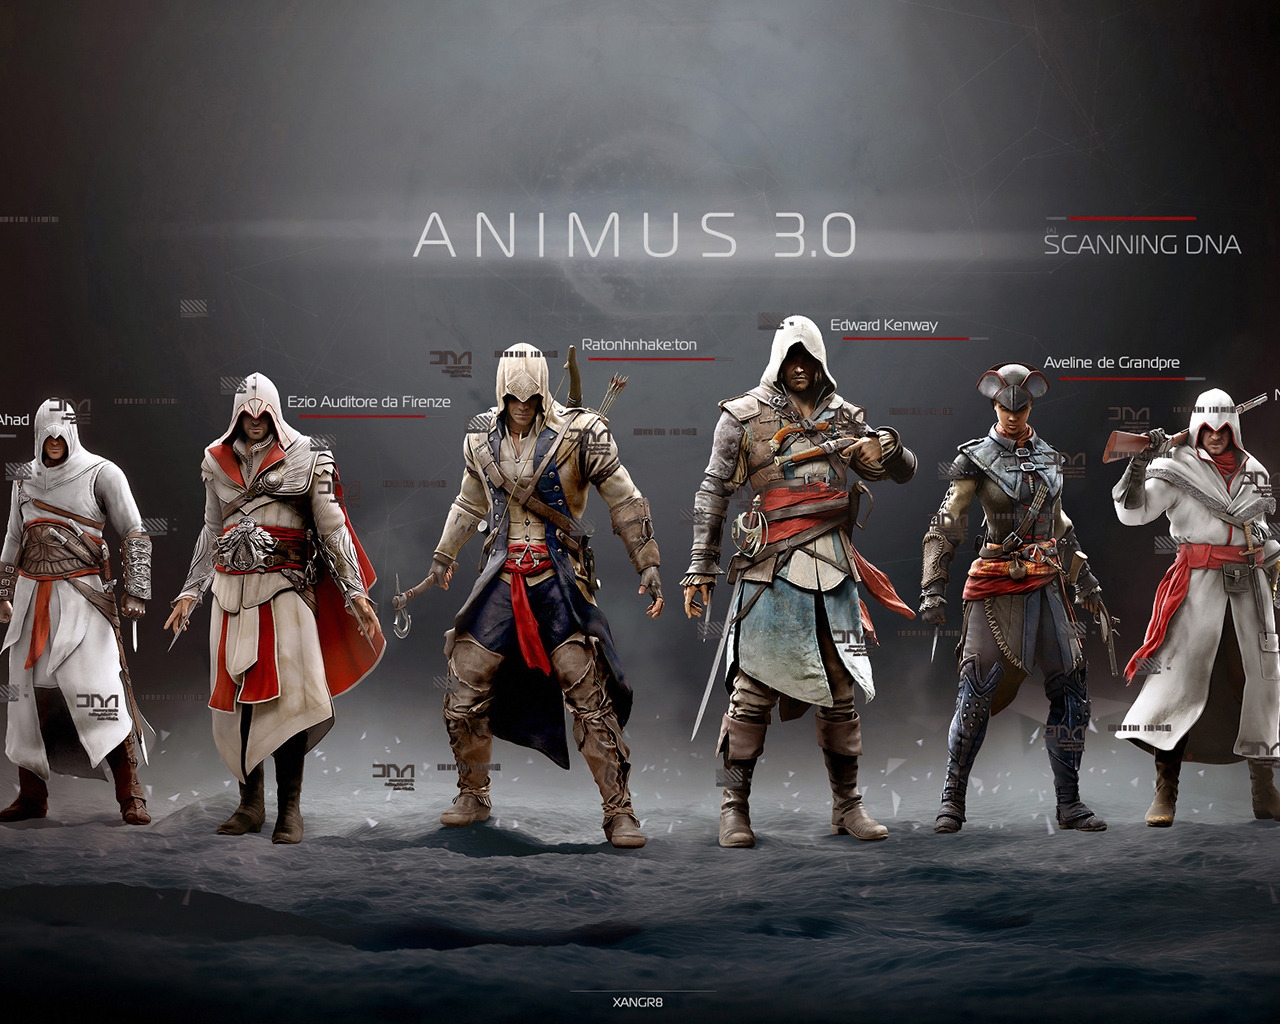 Animus for 1280 x 1024 resolution